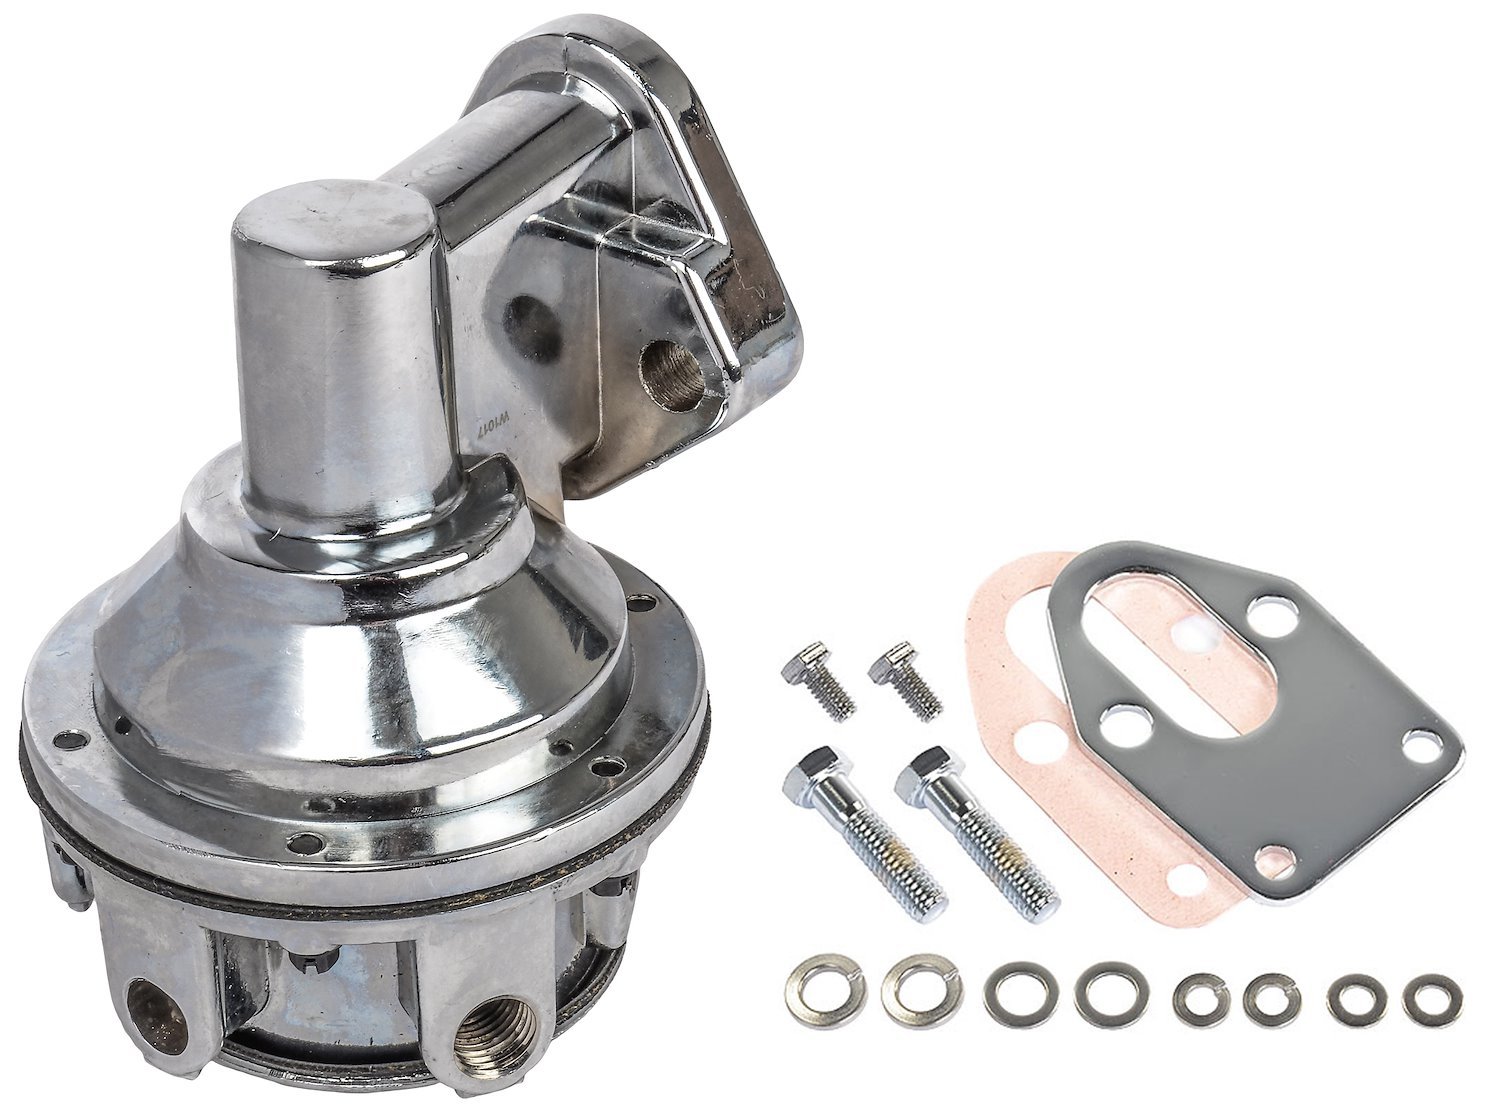 Fuel Pump and Mount Plate Kit for Small